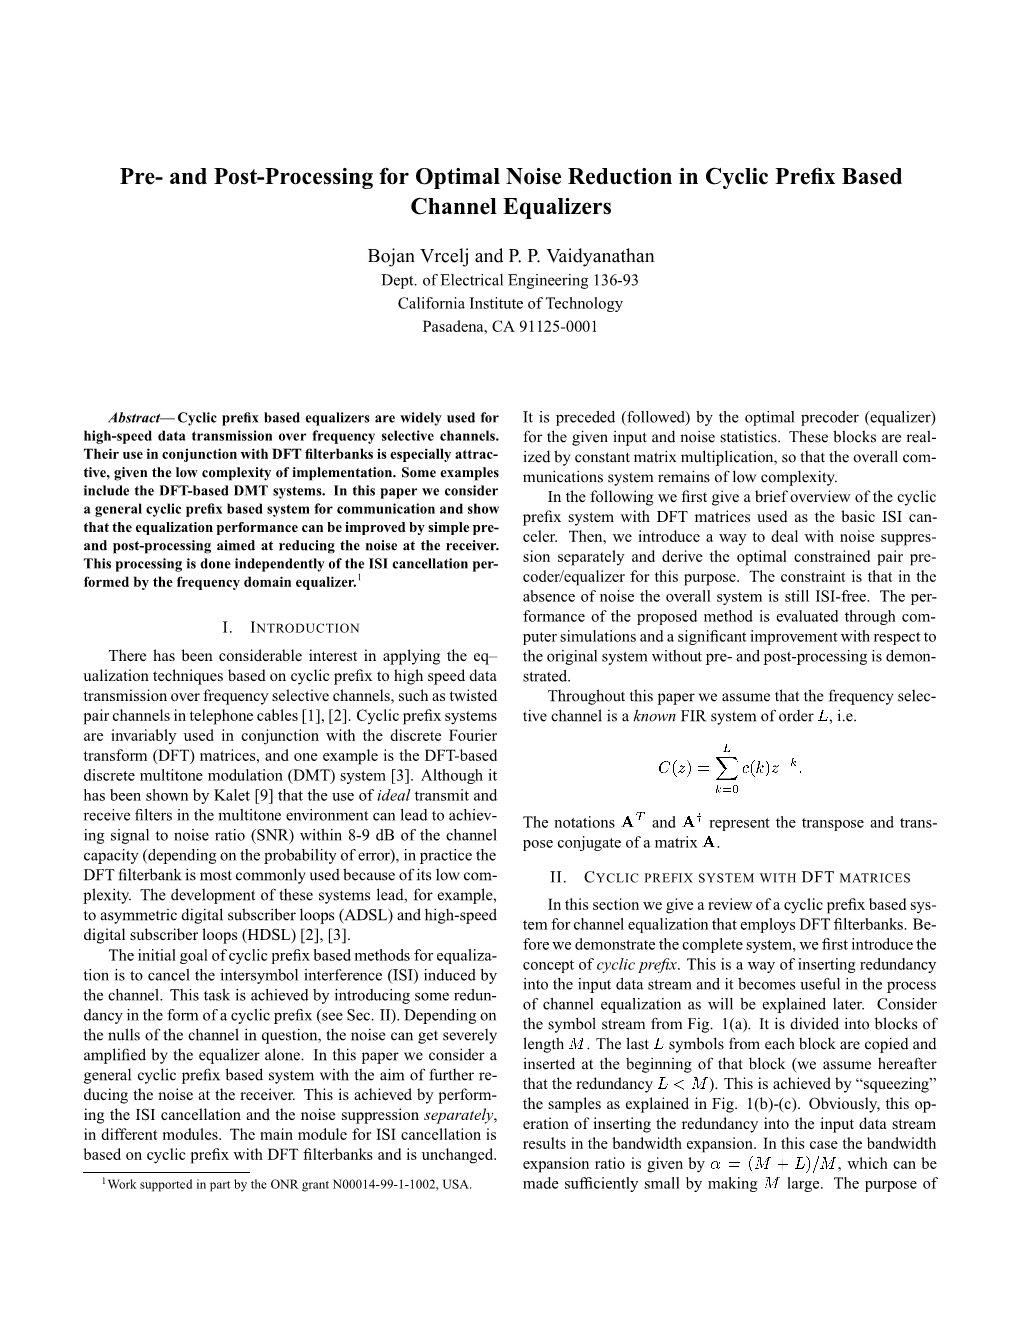 Pre- and Post-Processing for Optimal Noise Reduction in Cyclic Prefix